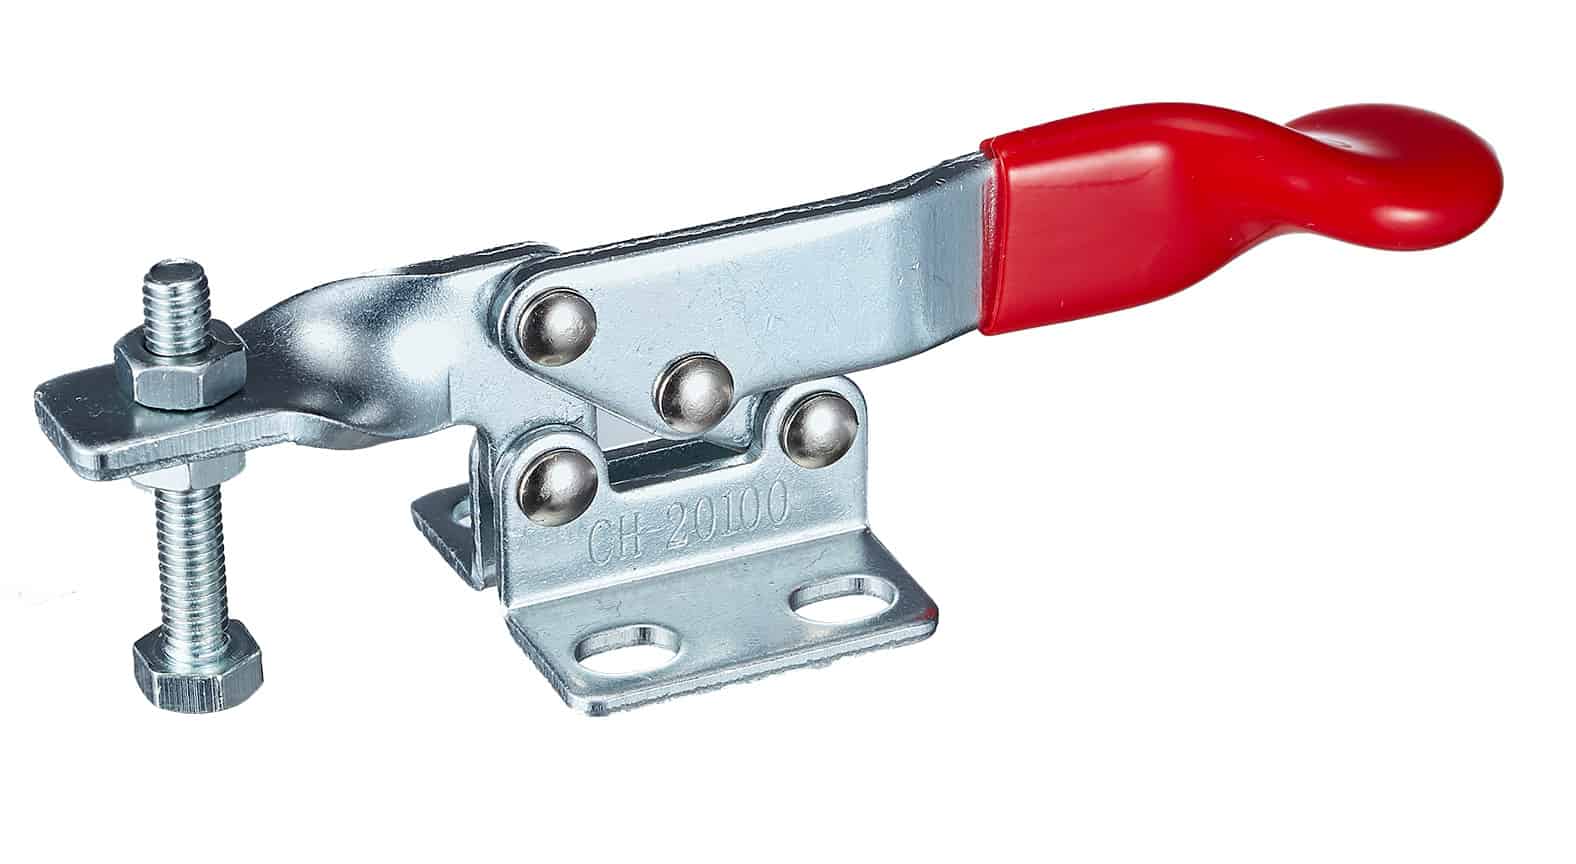 Toggle Clamp and a RAM Clamp